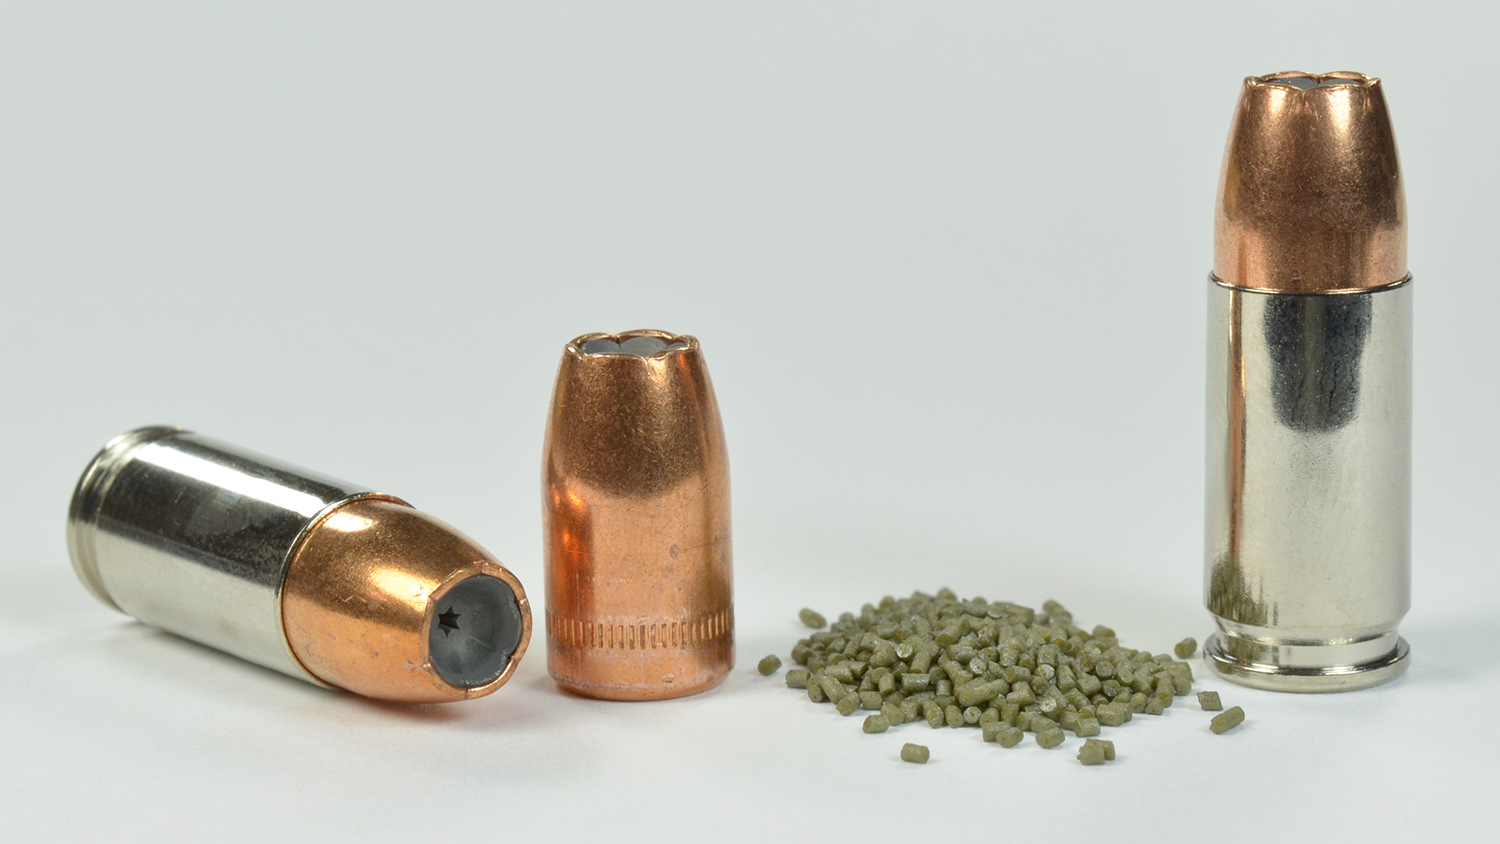 FIGURE 1: SIG’s Match Elite 9mm ammunition is loaded in their premium nickel-plated cases for maximum reliability. The powder weighed 4 grains. The overall length of 10 rounds was very uniform, ranging from 1.105 inches to 1.109 inches